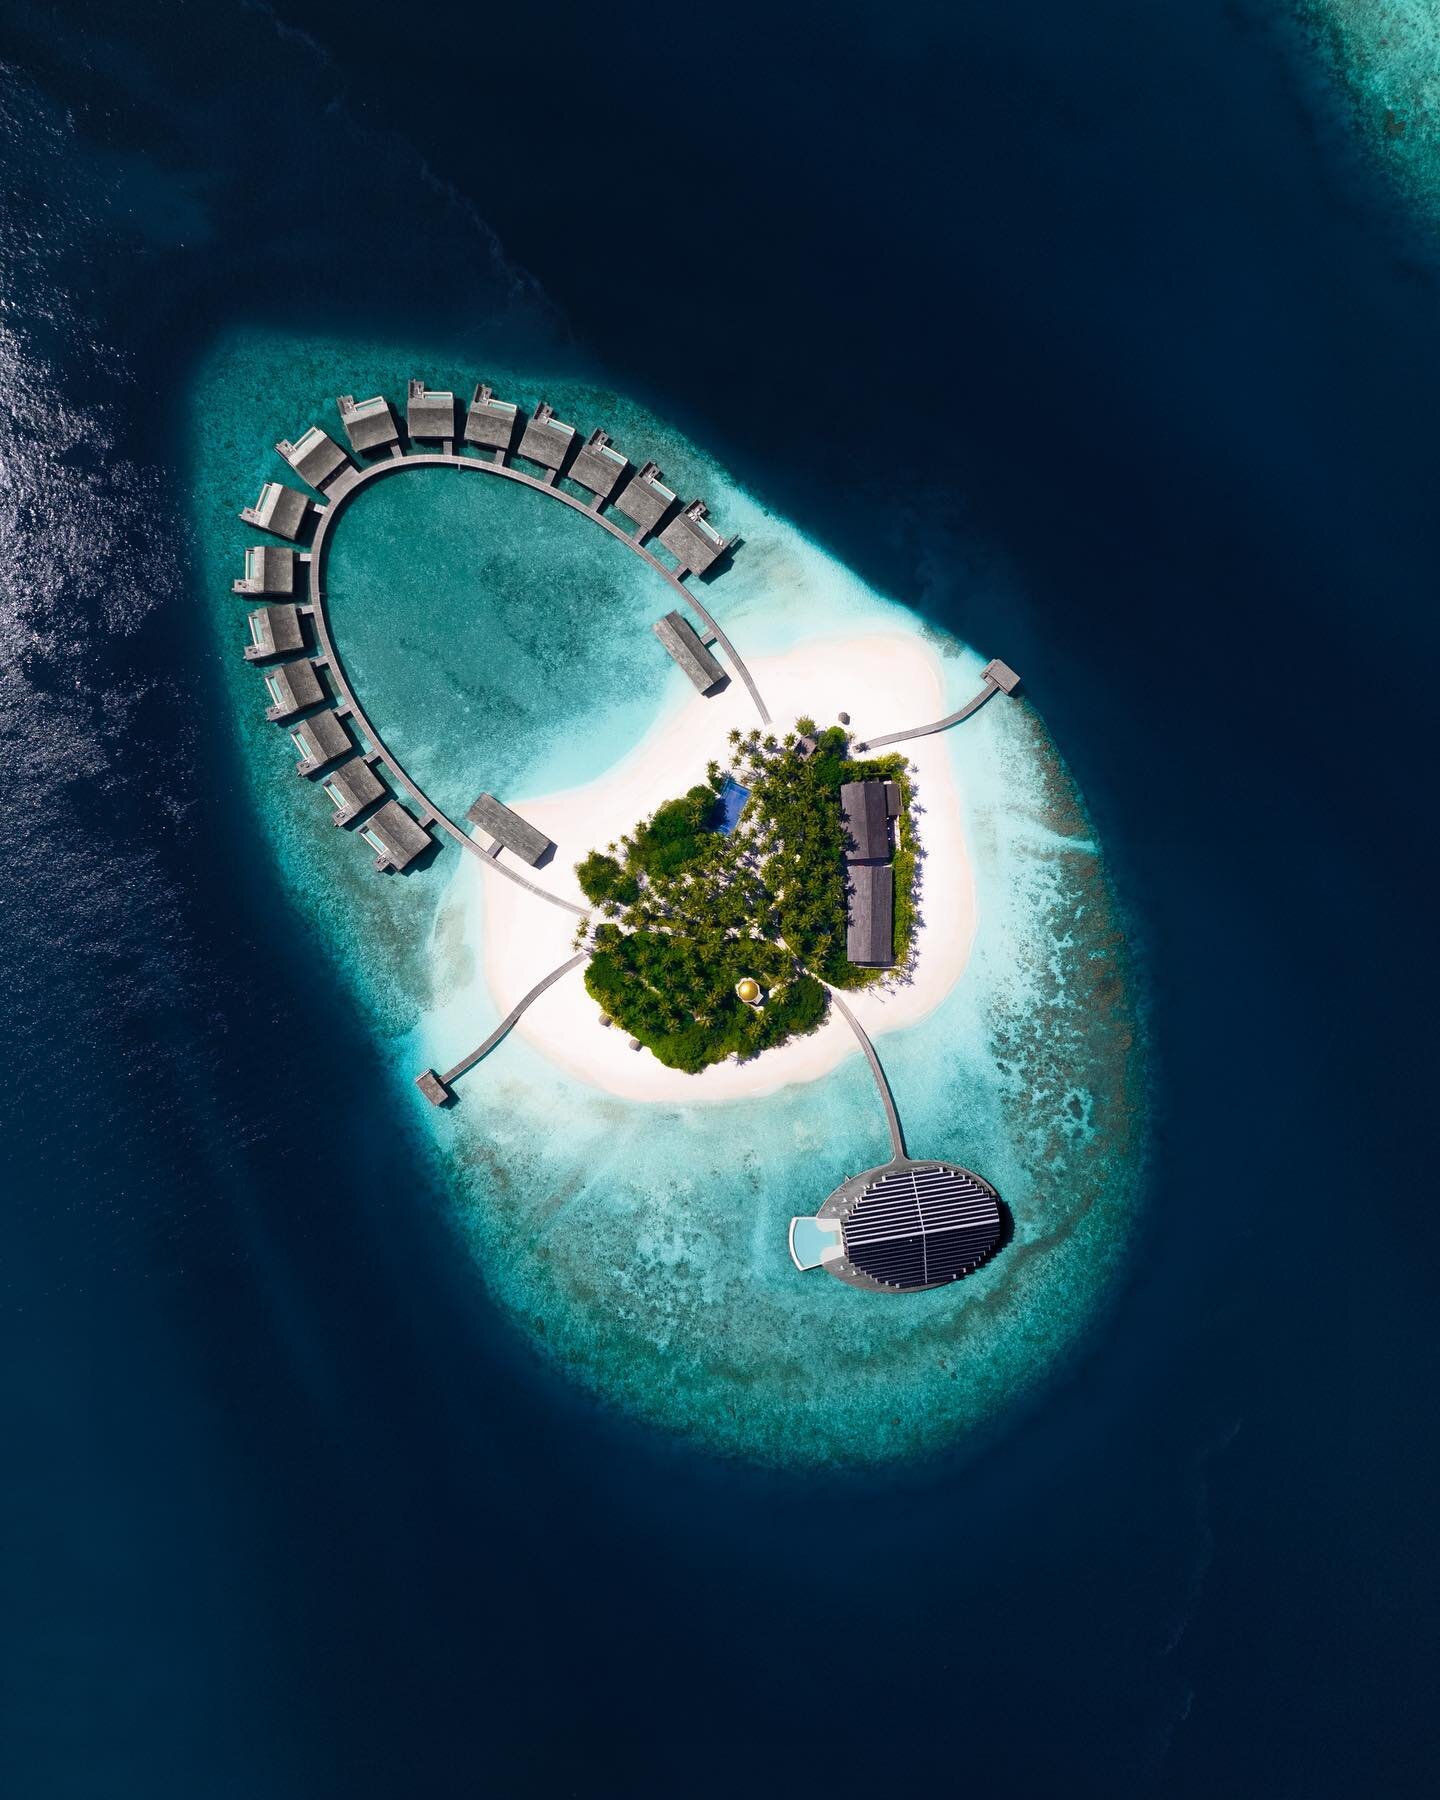 🏝 @kudadoomaldives by @hurawalhi - A fully solar-powered #privateisland with a one-of-a-kind design that blends sophistication with eco-sustainability 🍃